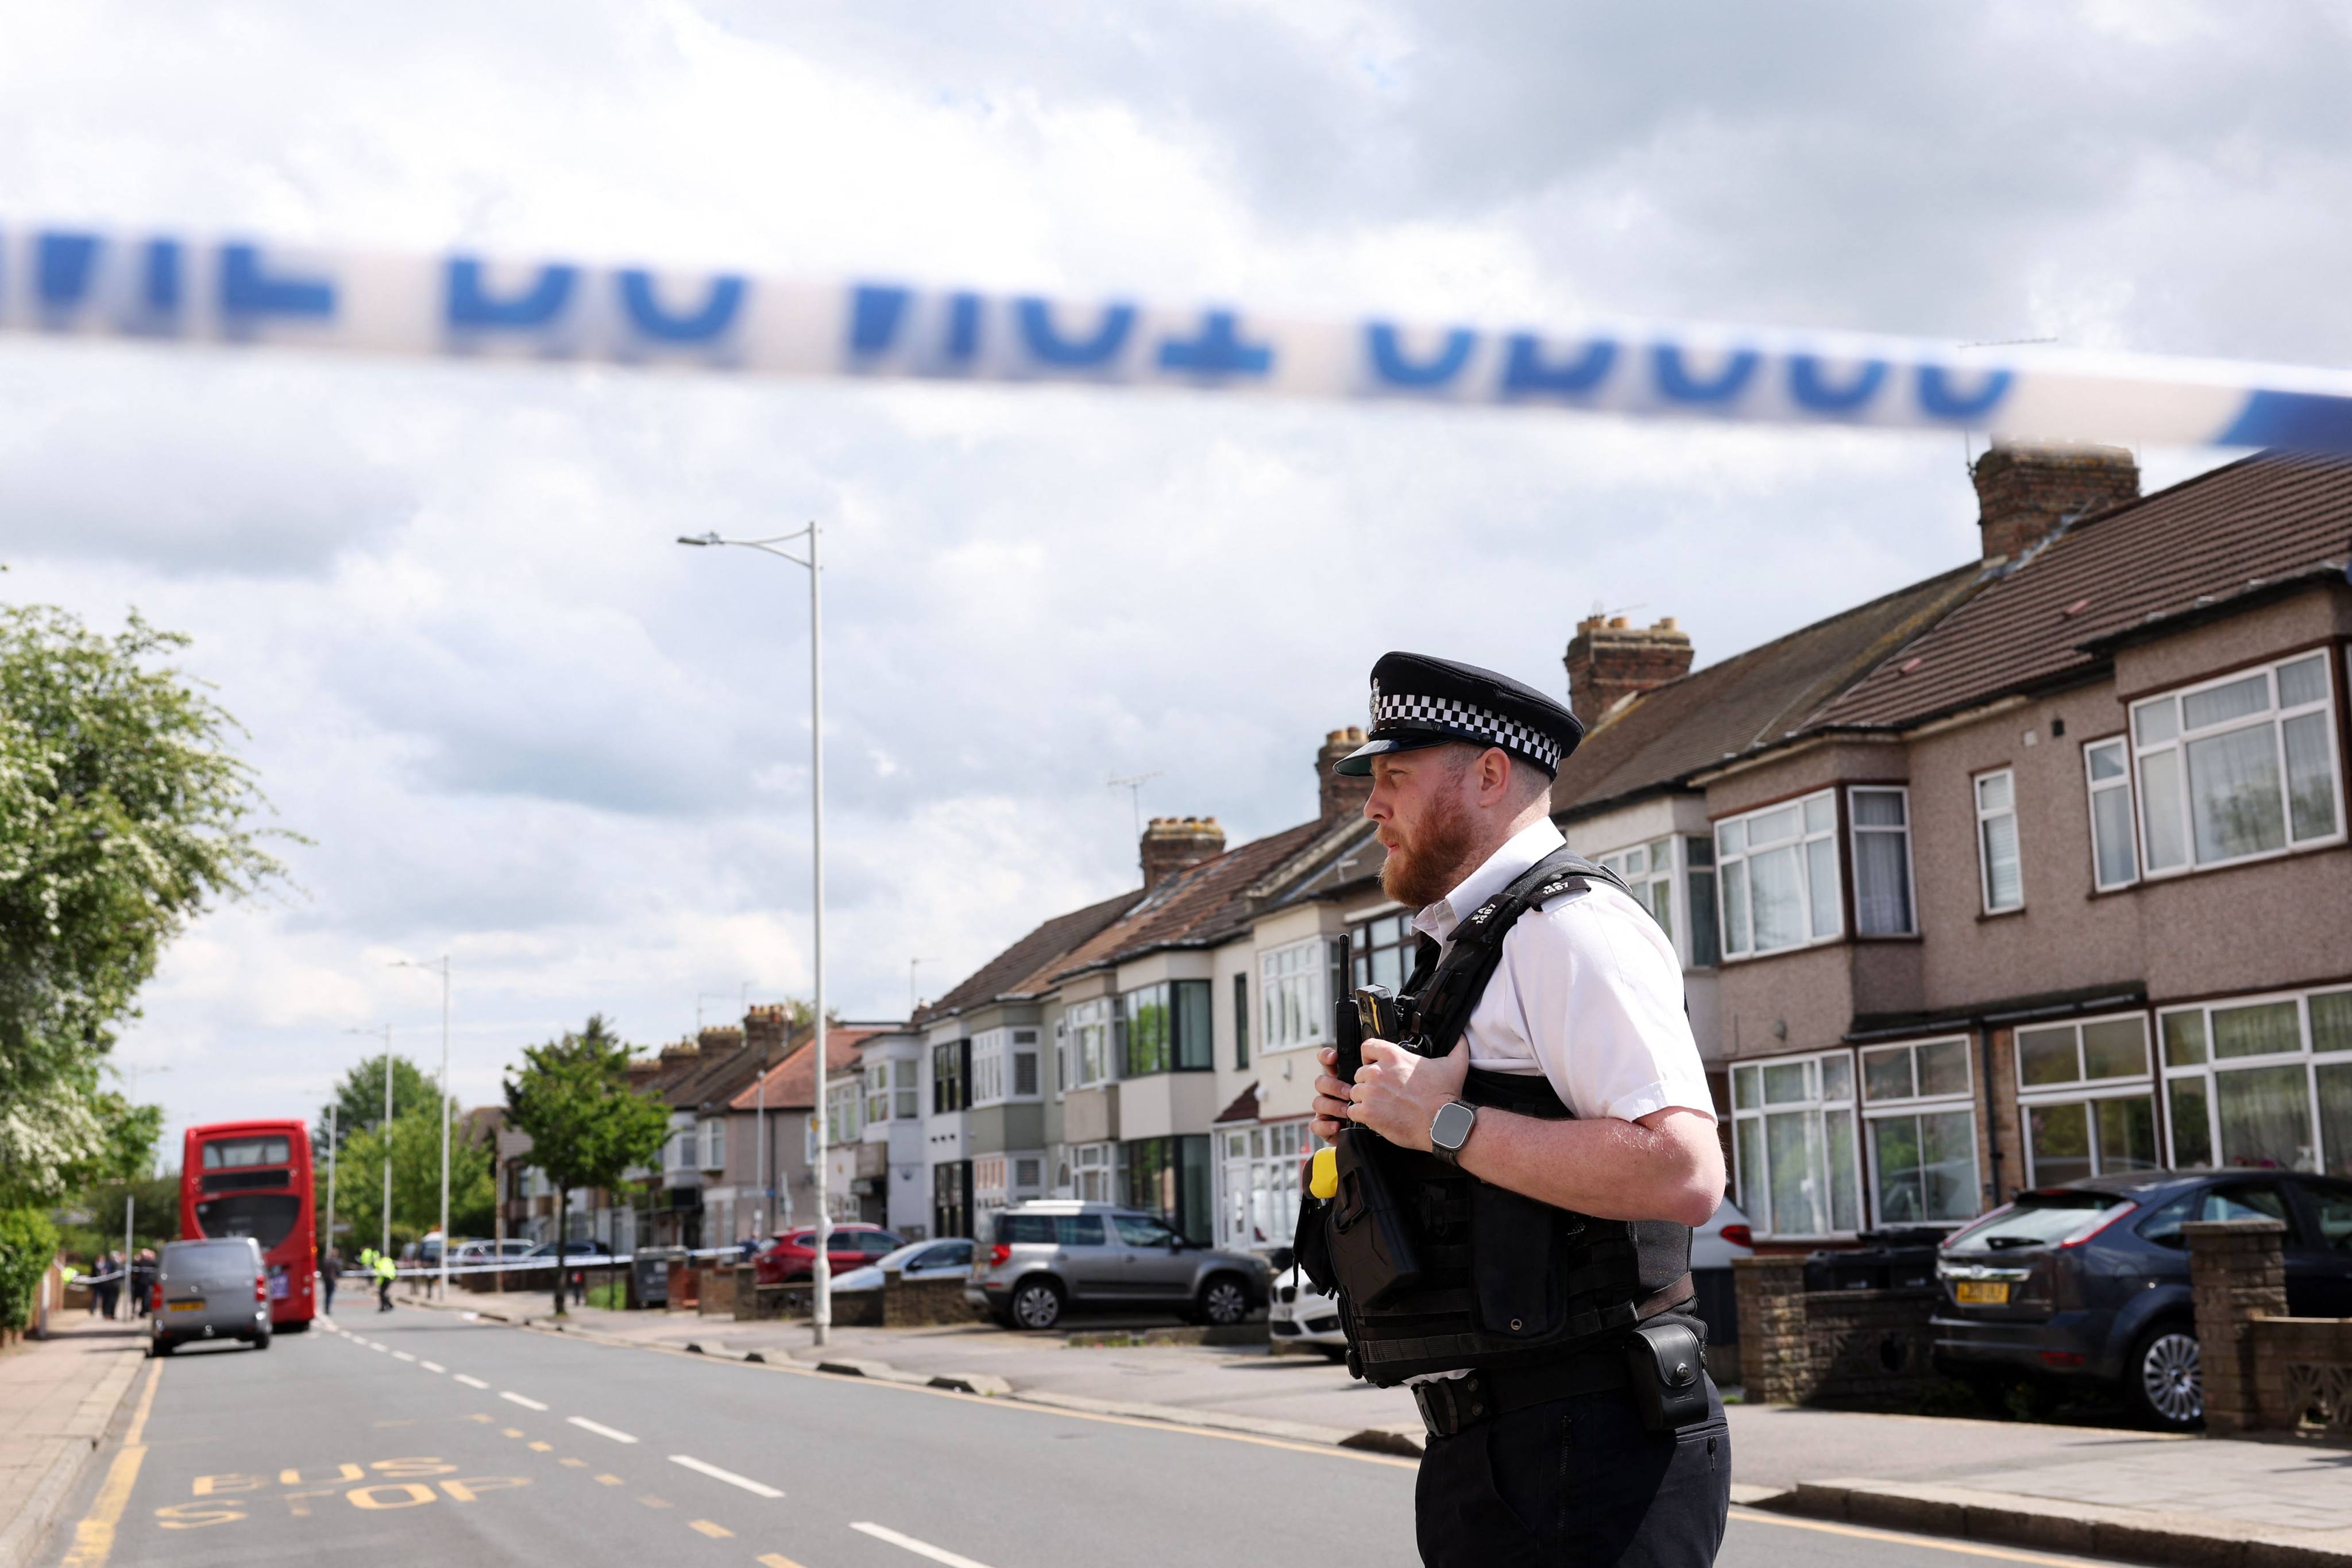 Police officers attend a crime scene in Hainault, east of London on Monday, where a 36-year-old man wielding a sword was arrested following an attack on members of the public and two police officers. Photo: AFP